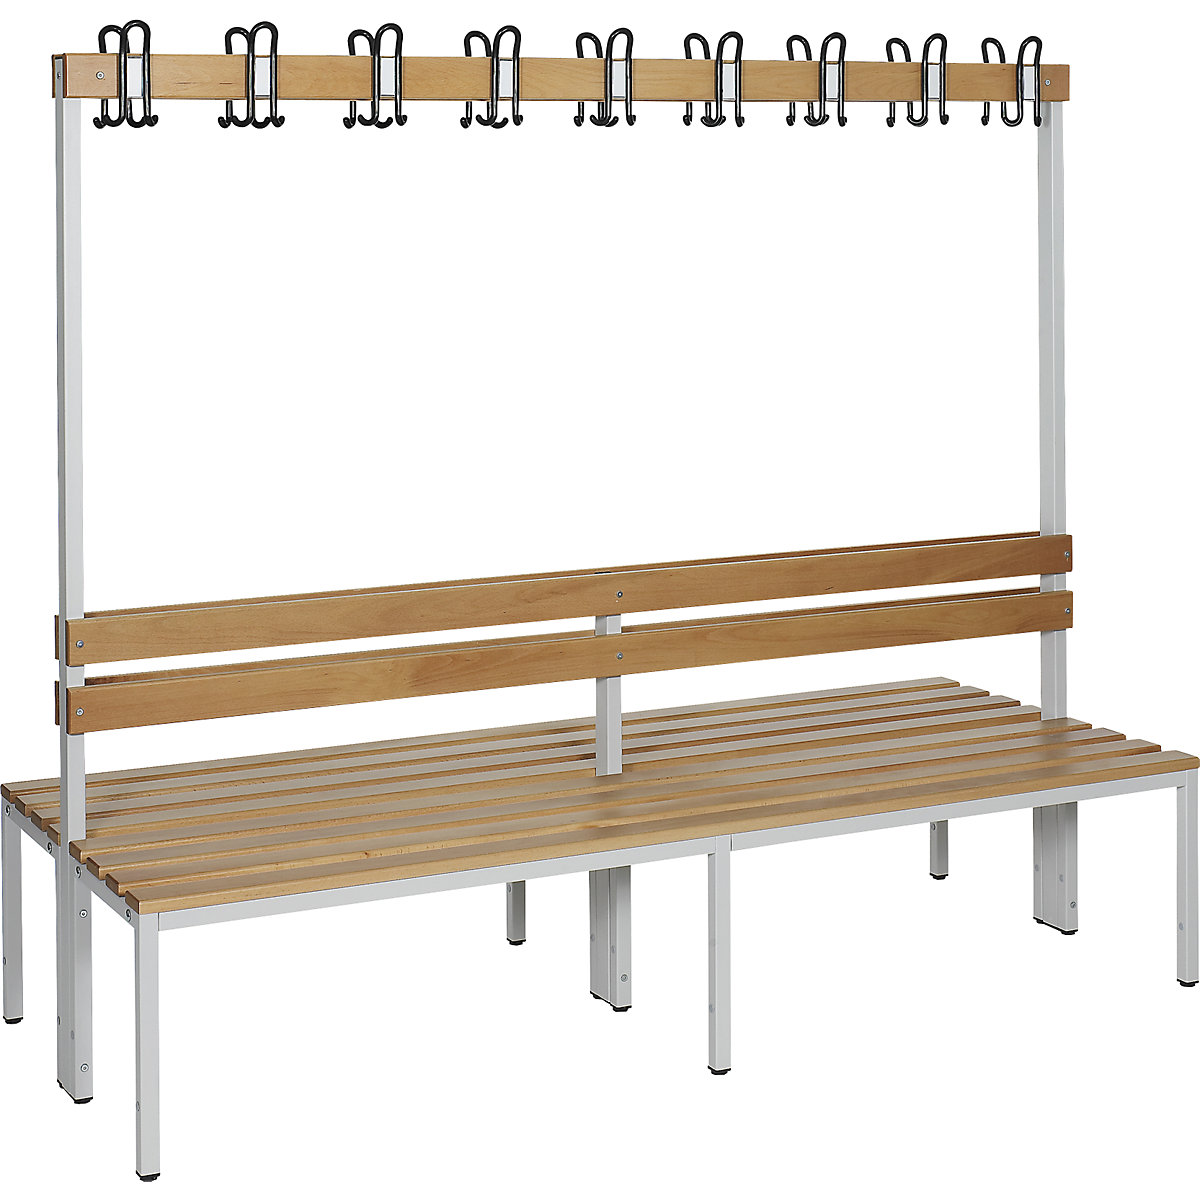 Beech cloakroom bench – eurokraft basic, double sided with back rest, HxD 1700 x 850 mm, length 2000 mm-4